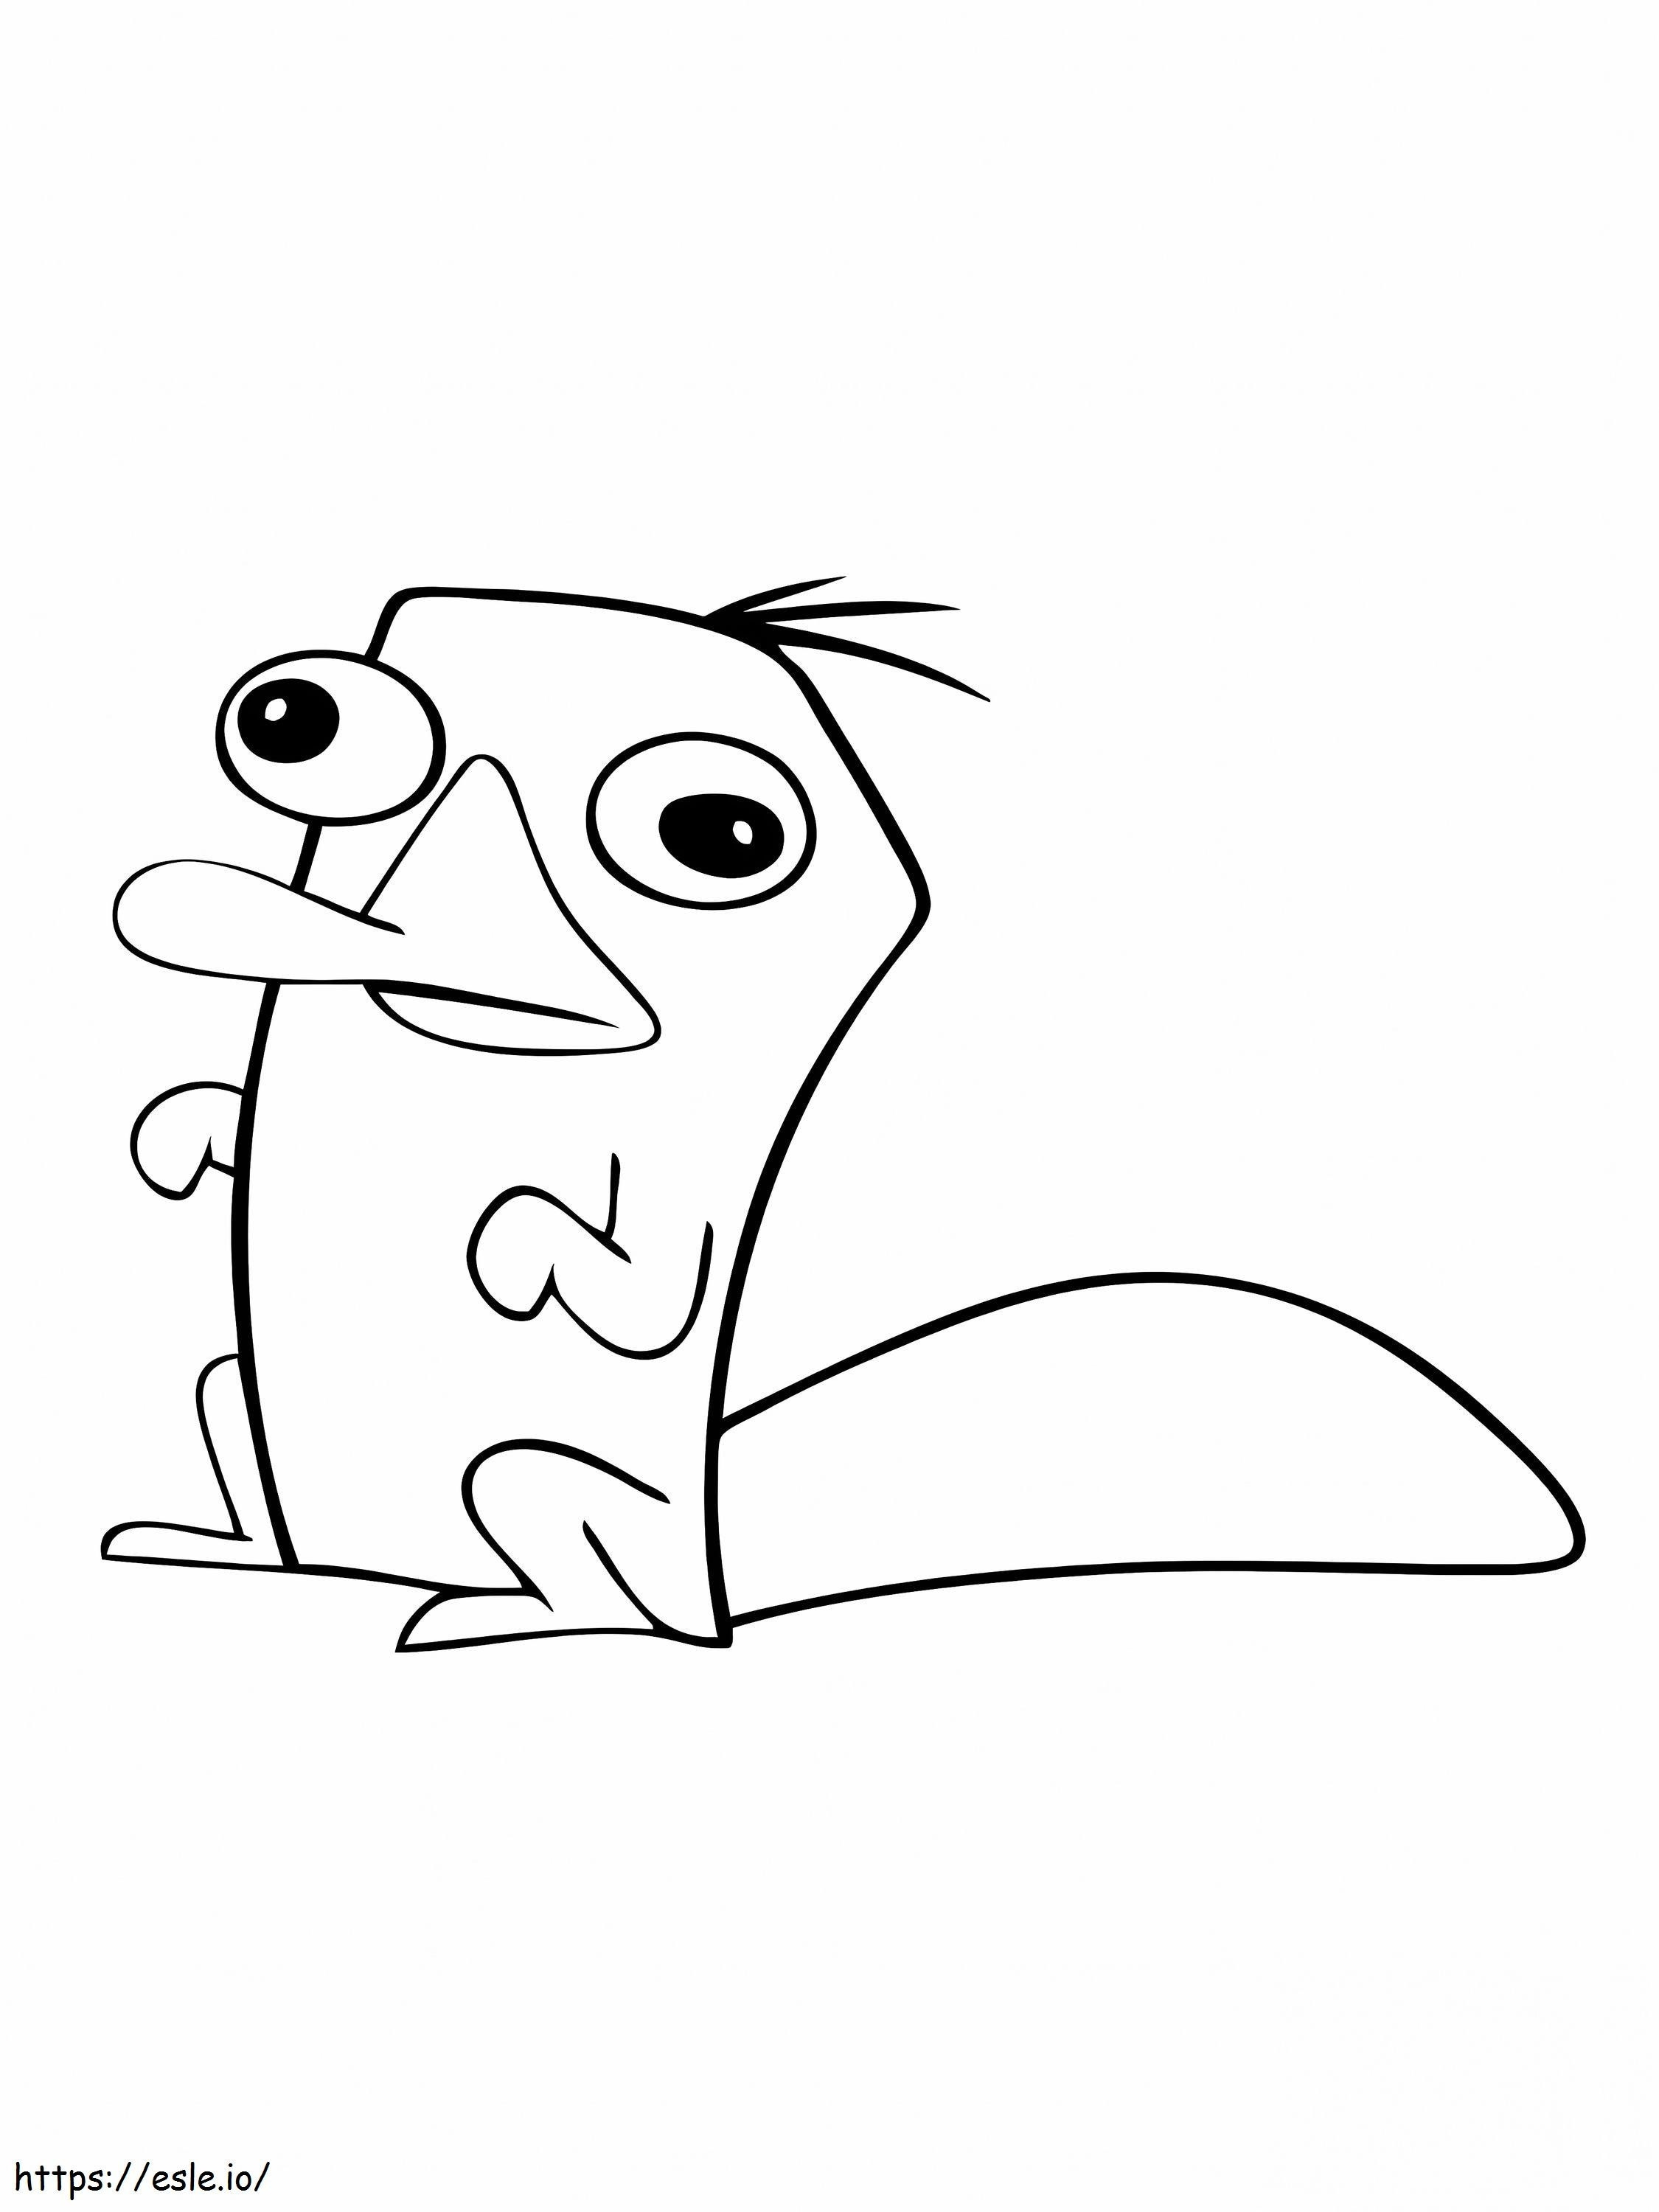 Perry The Platypus coloring page